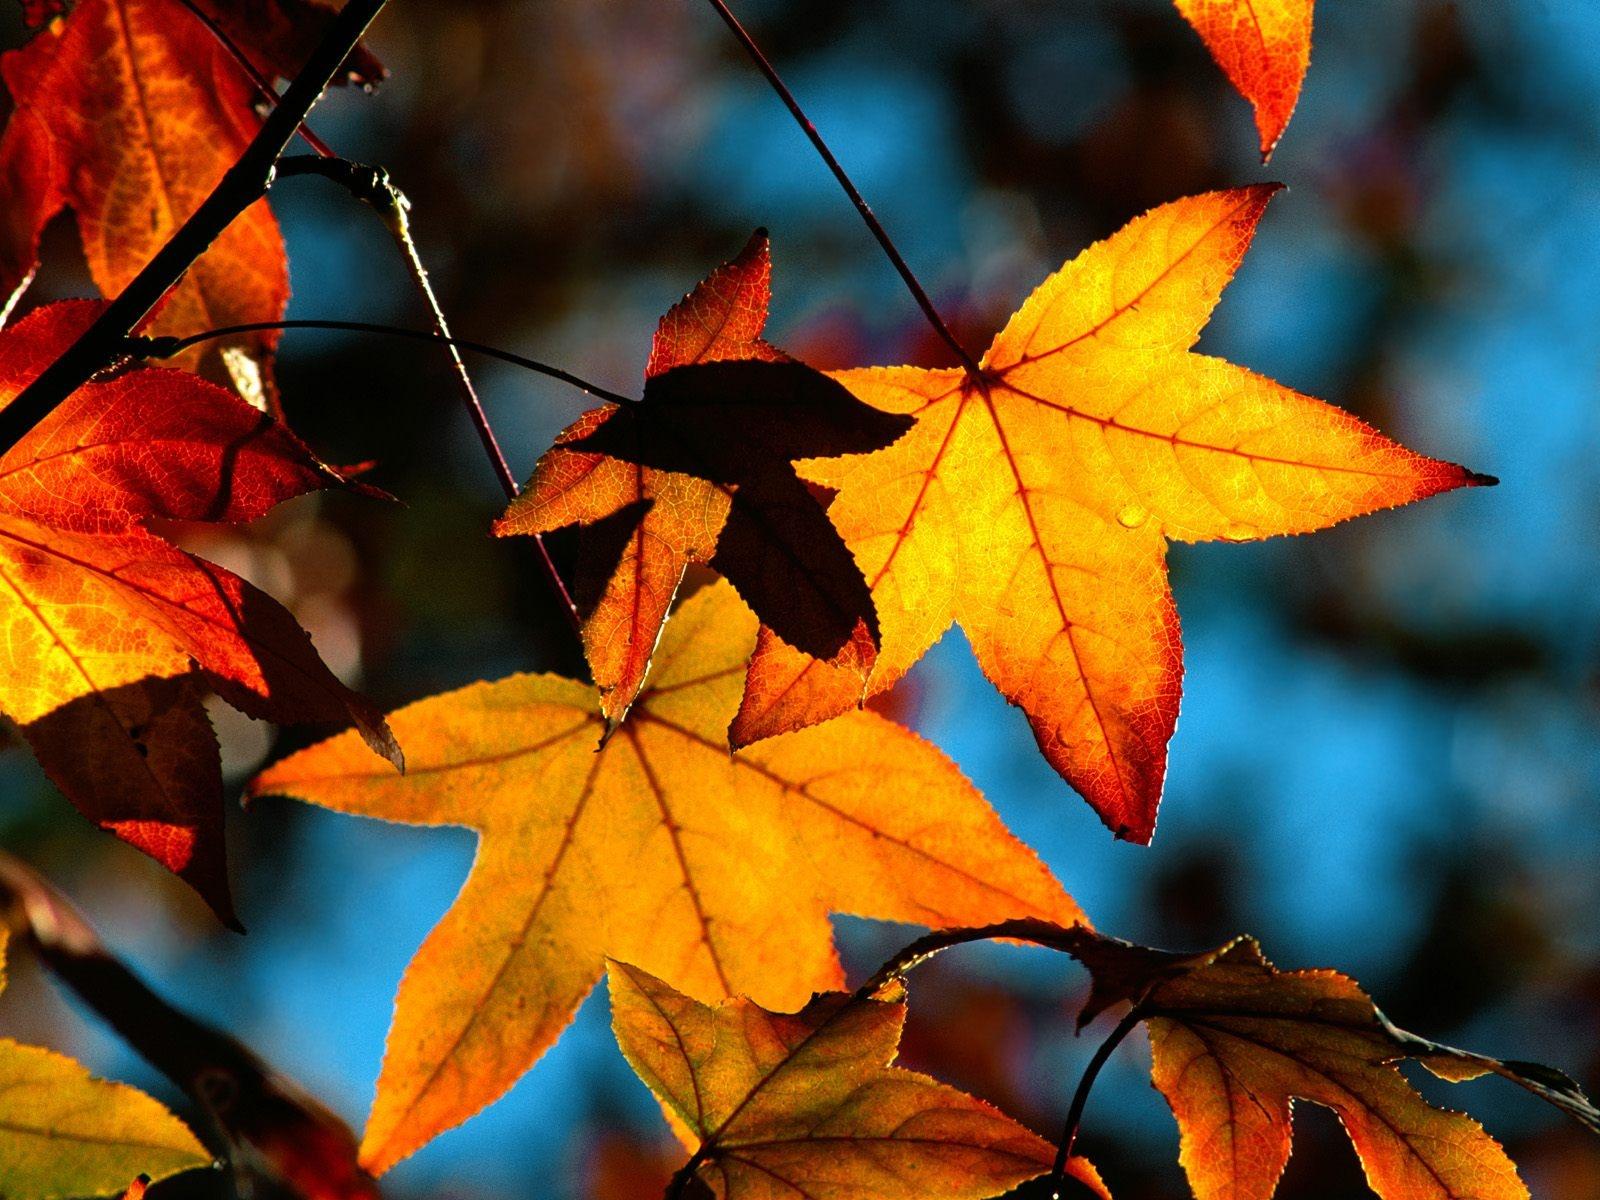 Colors Of Fall Wallpaper in jpg format for free download